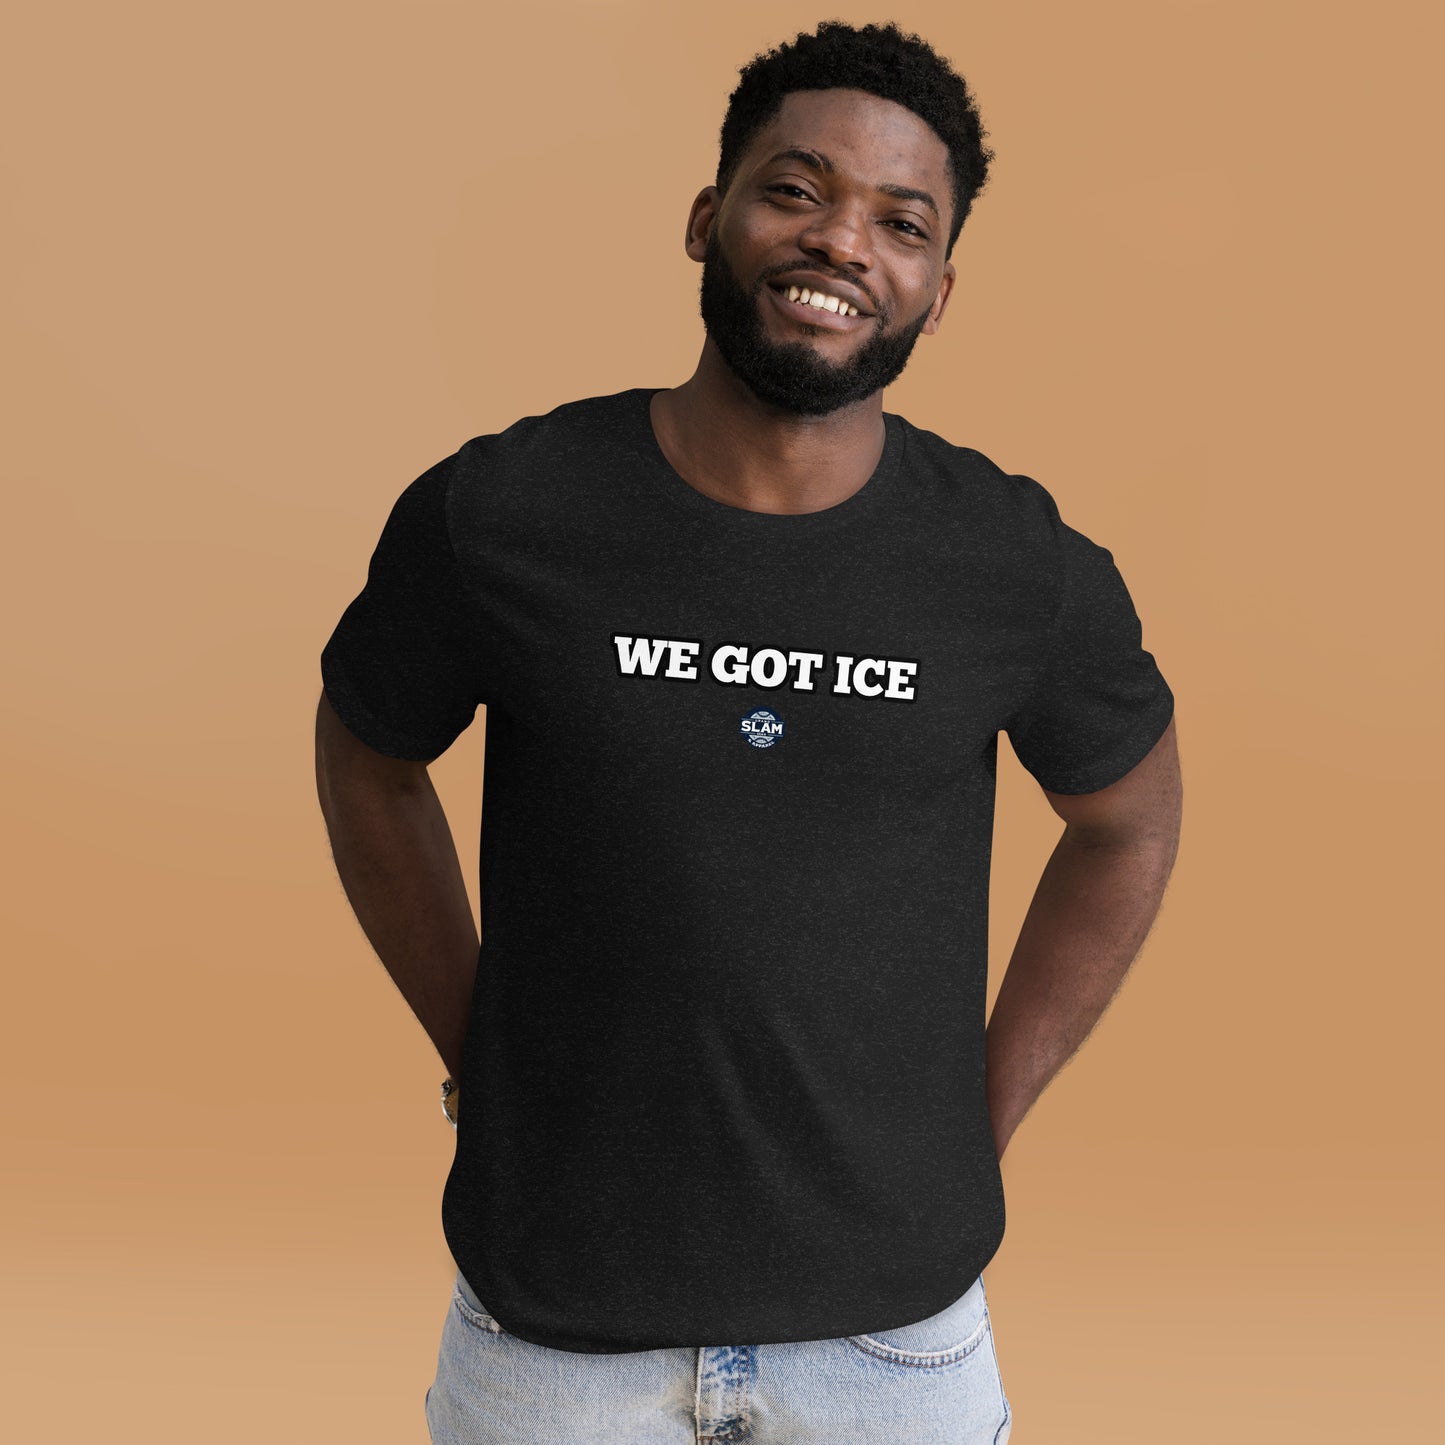 "We Got Ice" Ultra-Soft Lightweight T-Shirt - Comfy & Stretchy | Unisex Fit